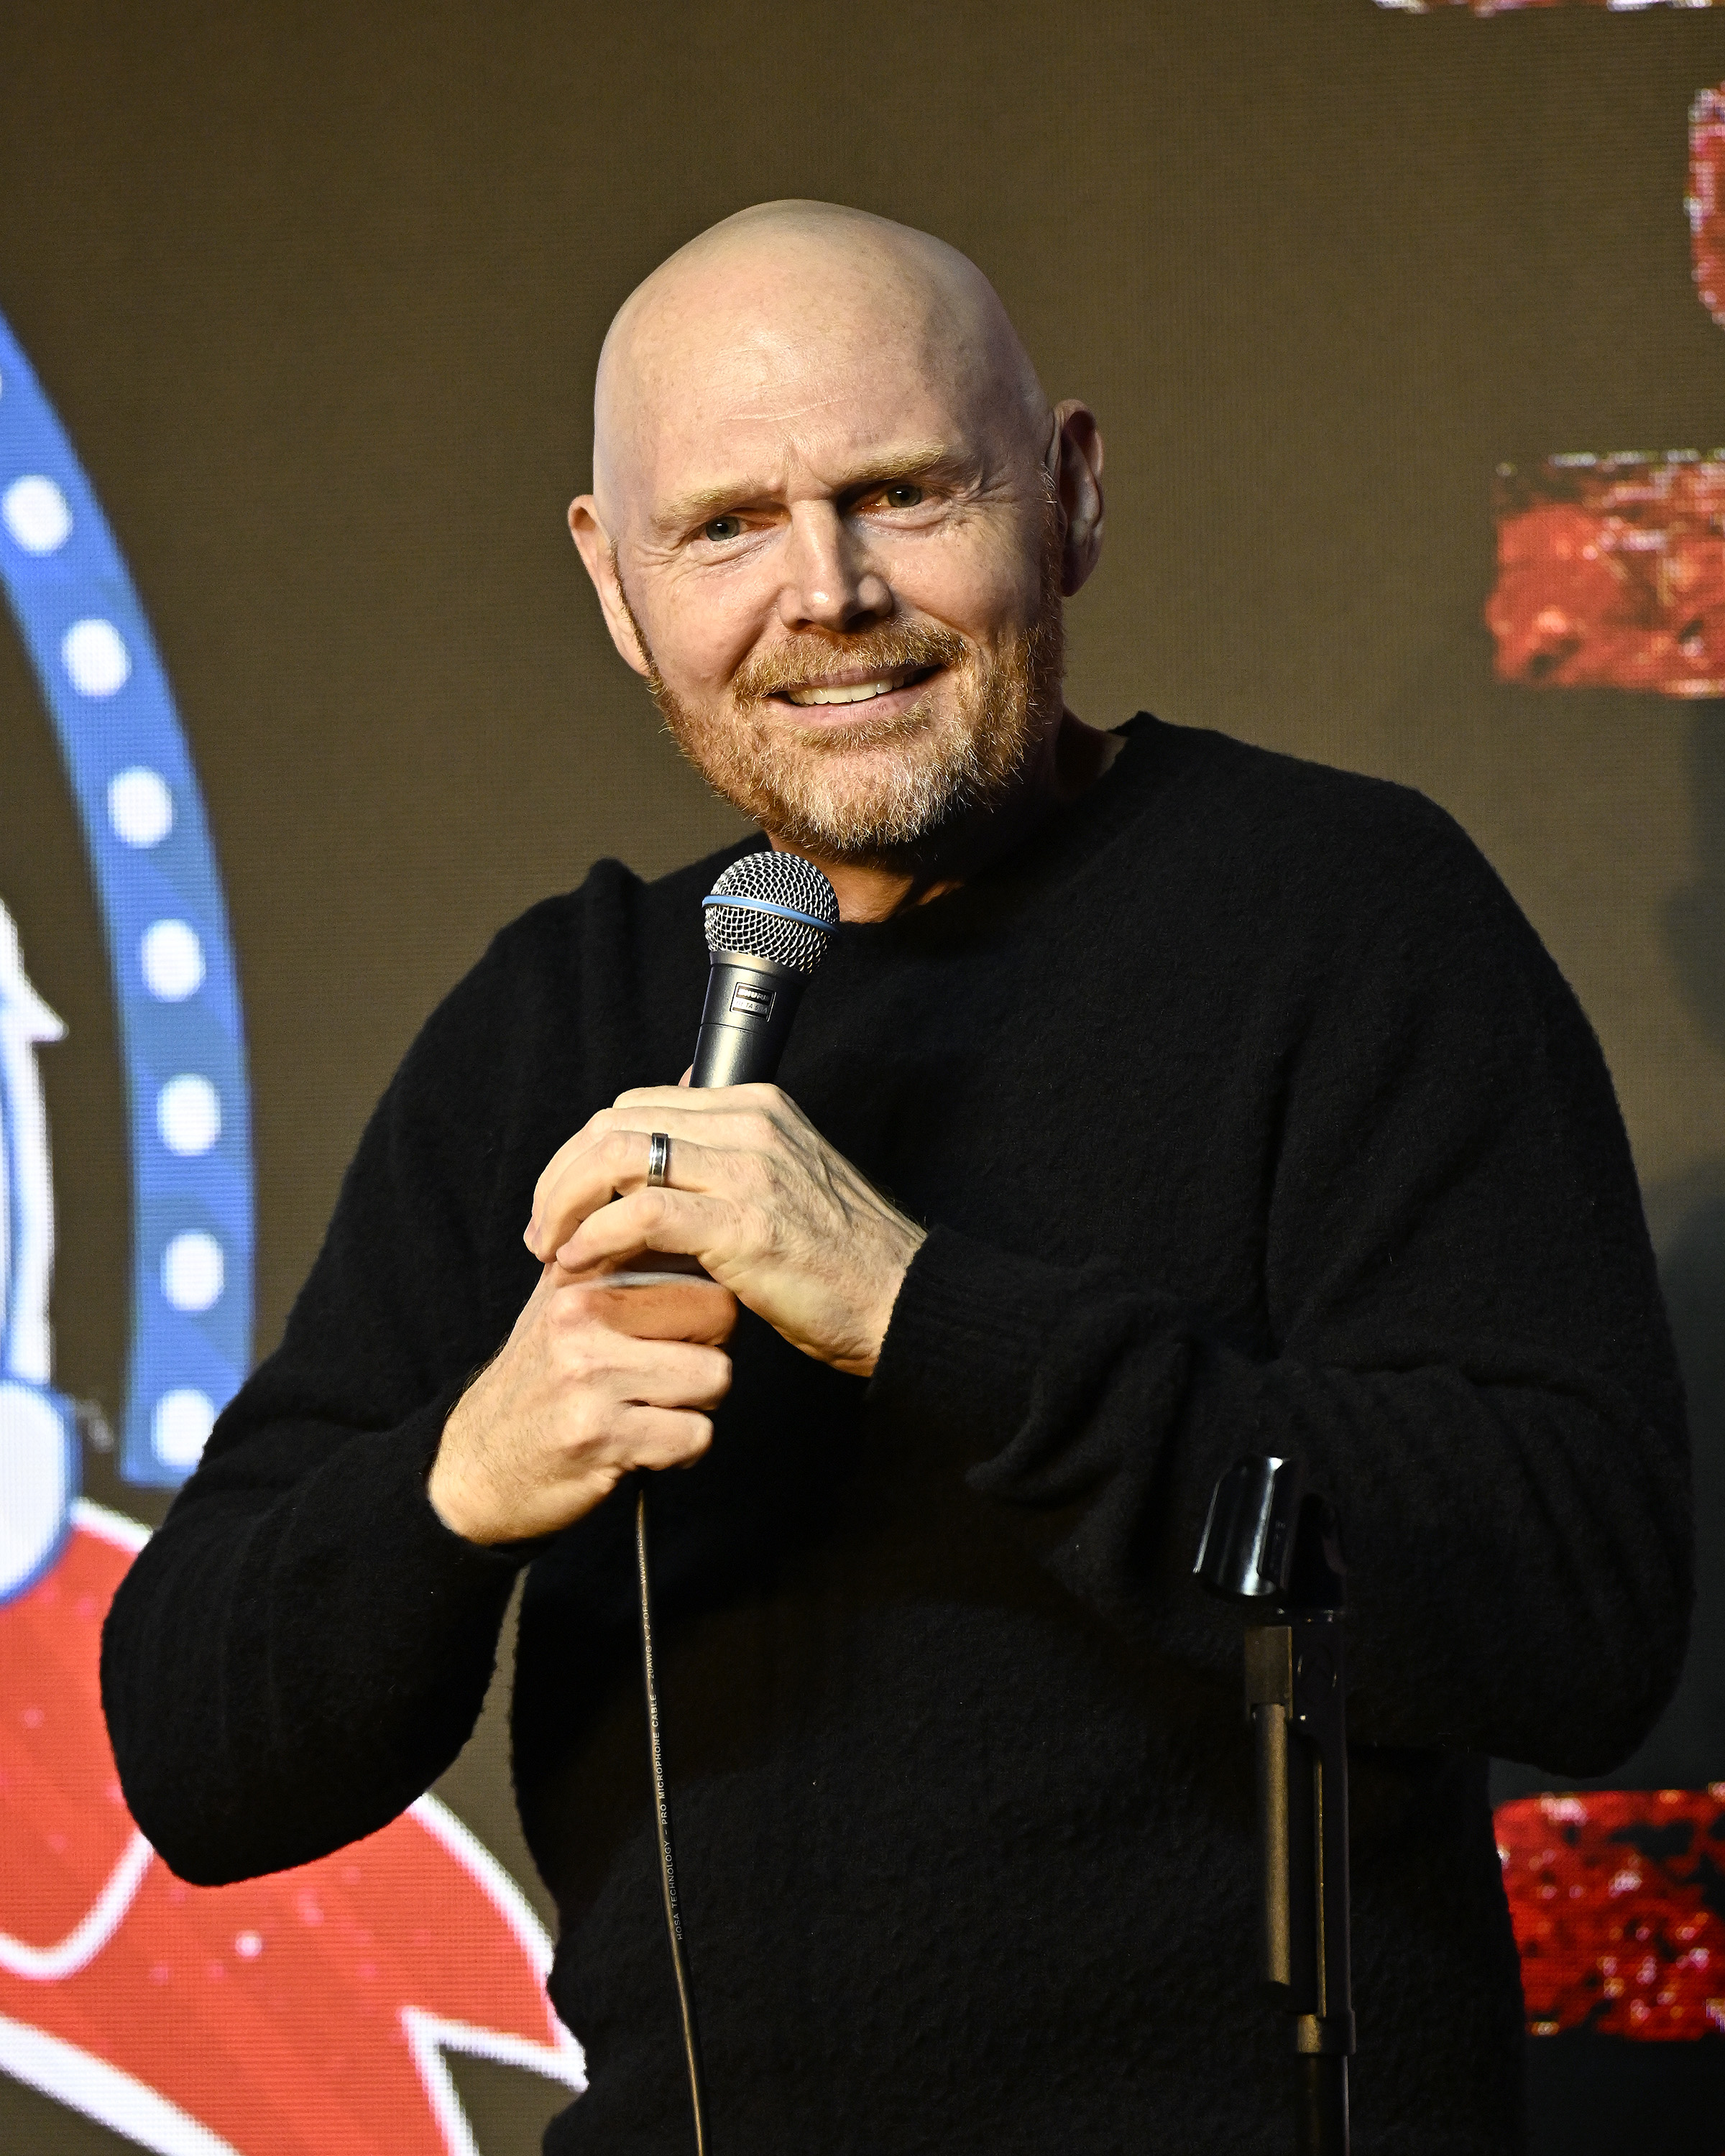 Bill Burr performs at the Dusted Company Comedy Show at The Ice House Comedy Club on December 27, 2023, in Pasadena, California. | Source: Getty Images